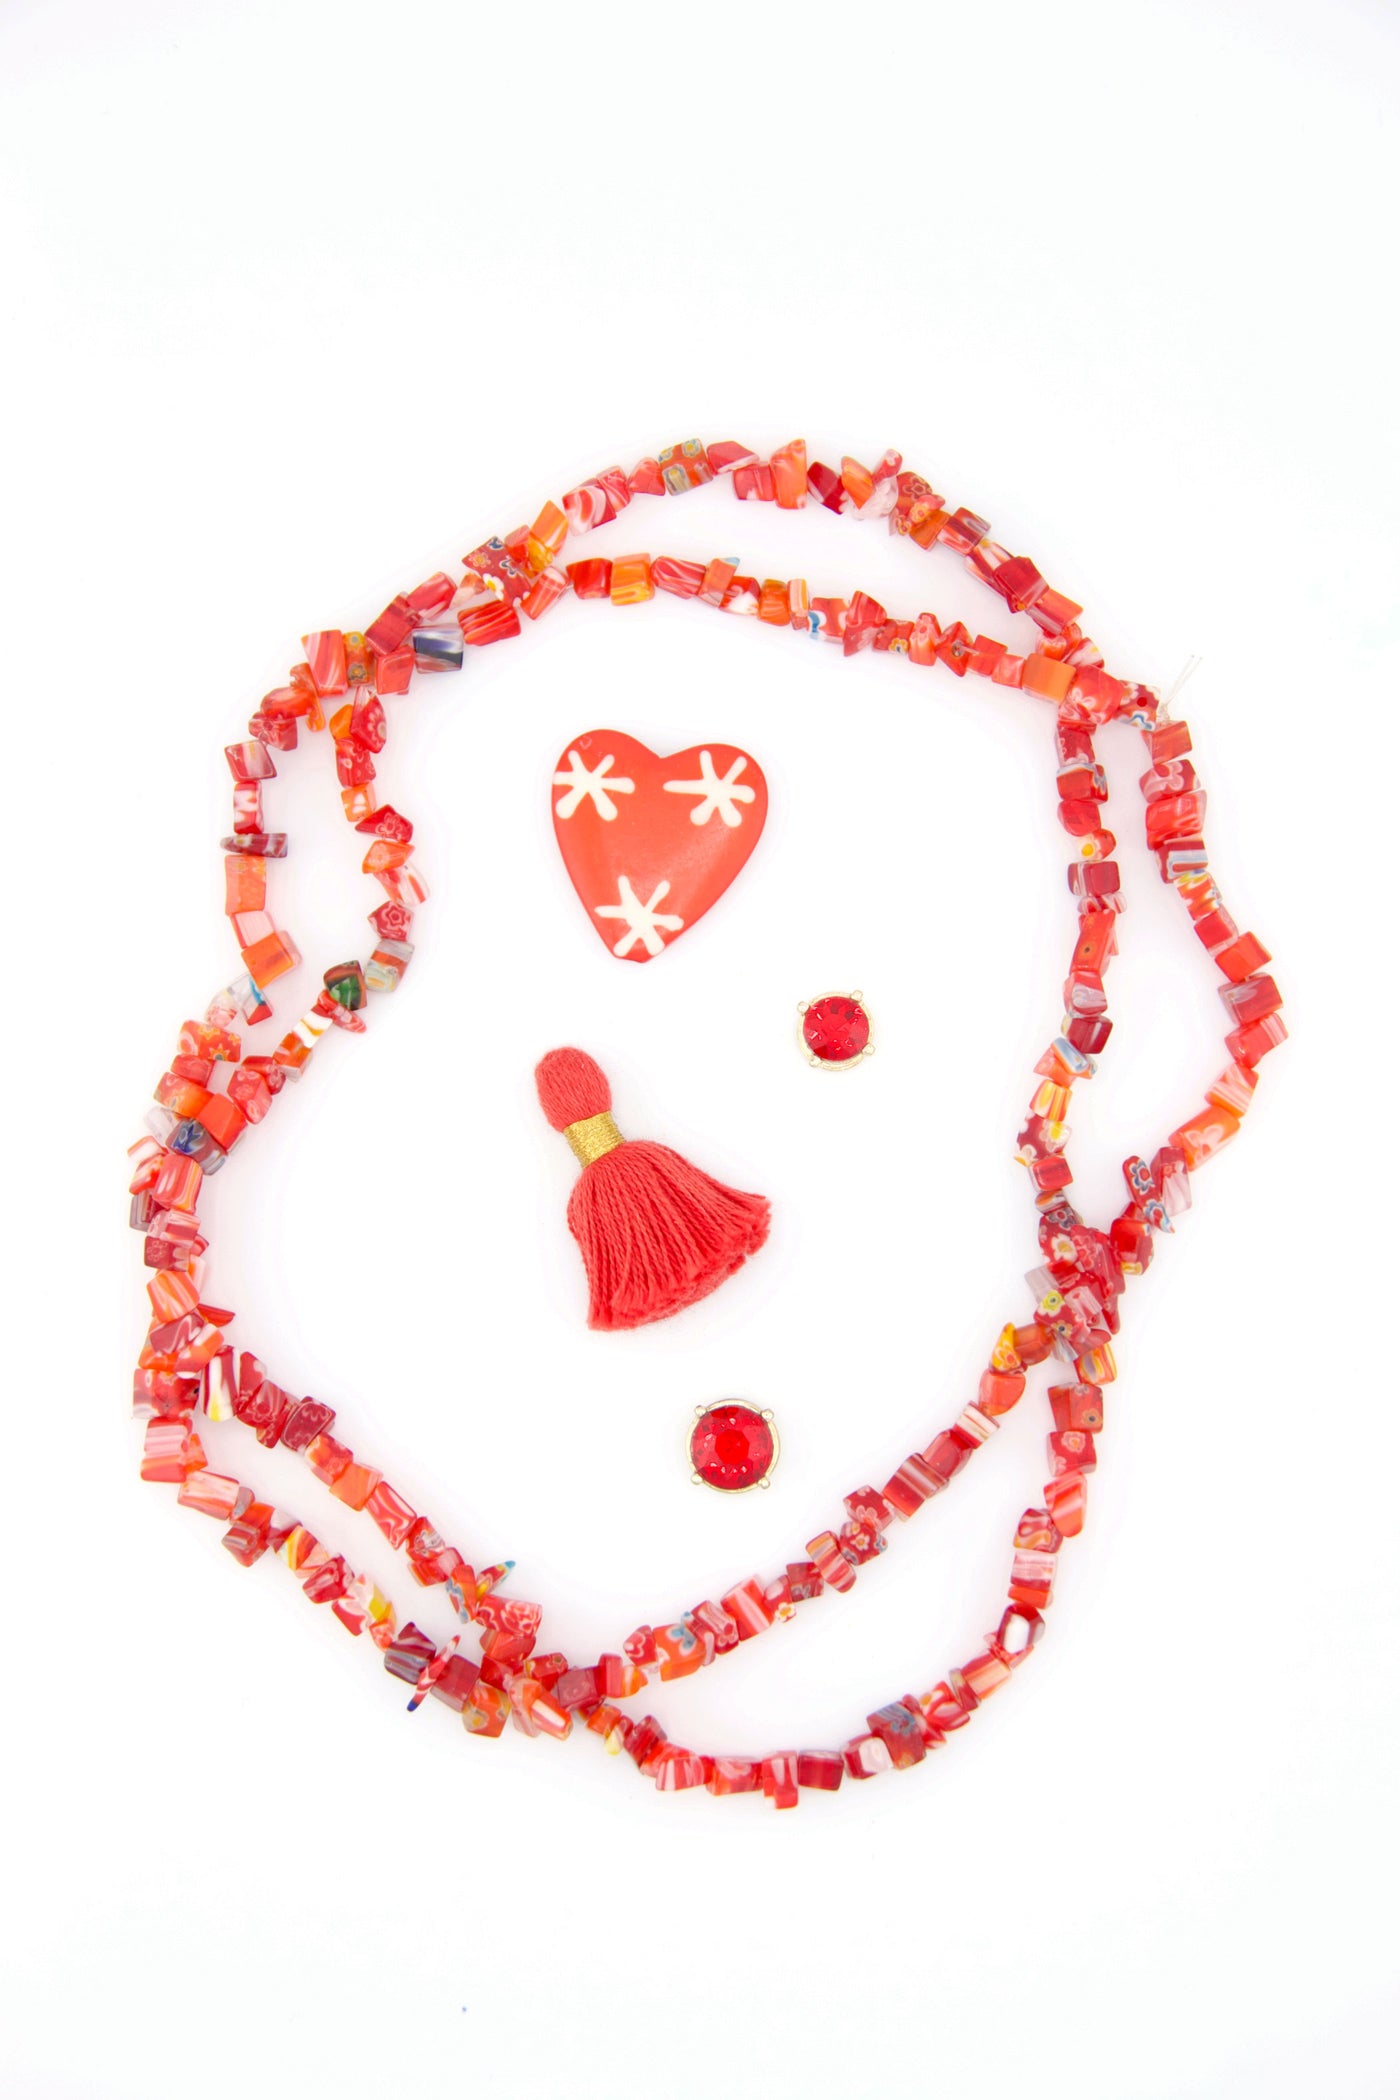 Red Glass Bead Necklace, Vintage, for Valentine's Day or DIY Jewelry